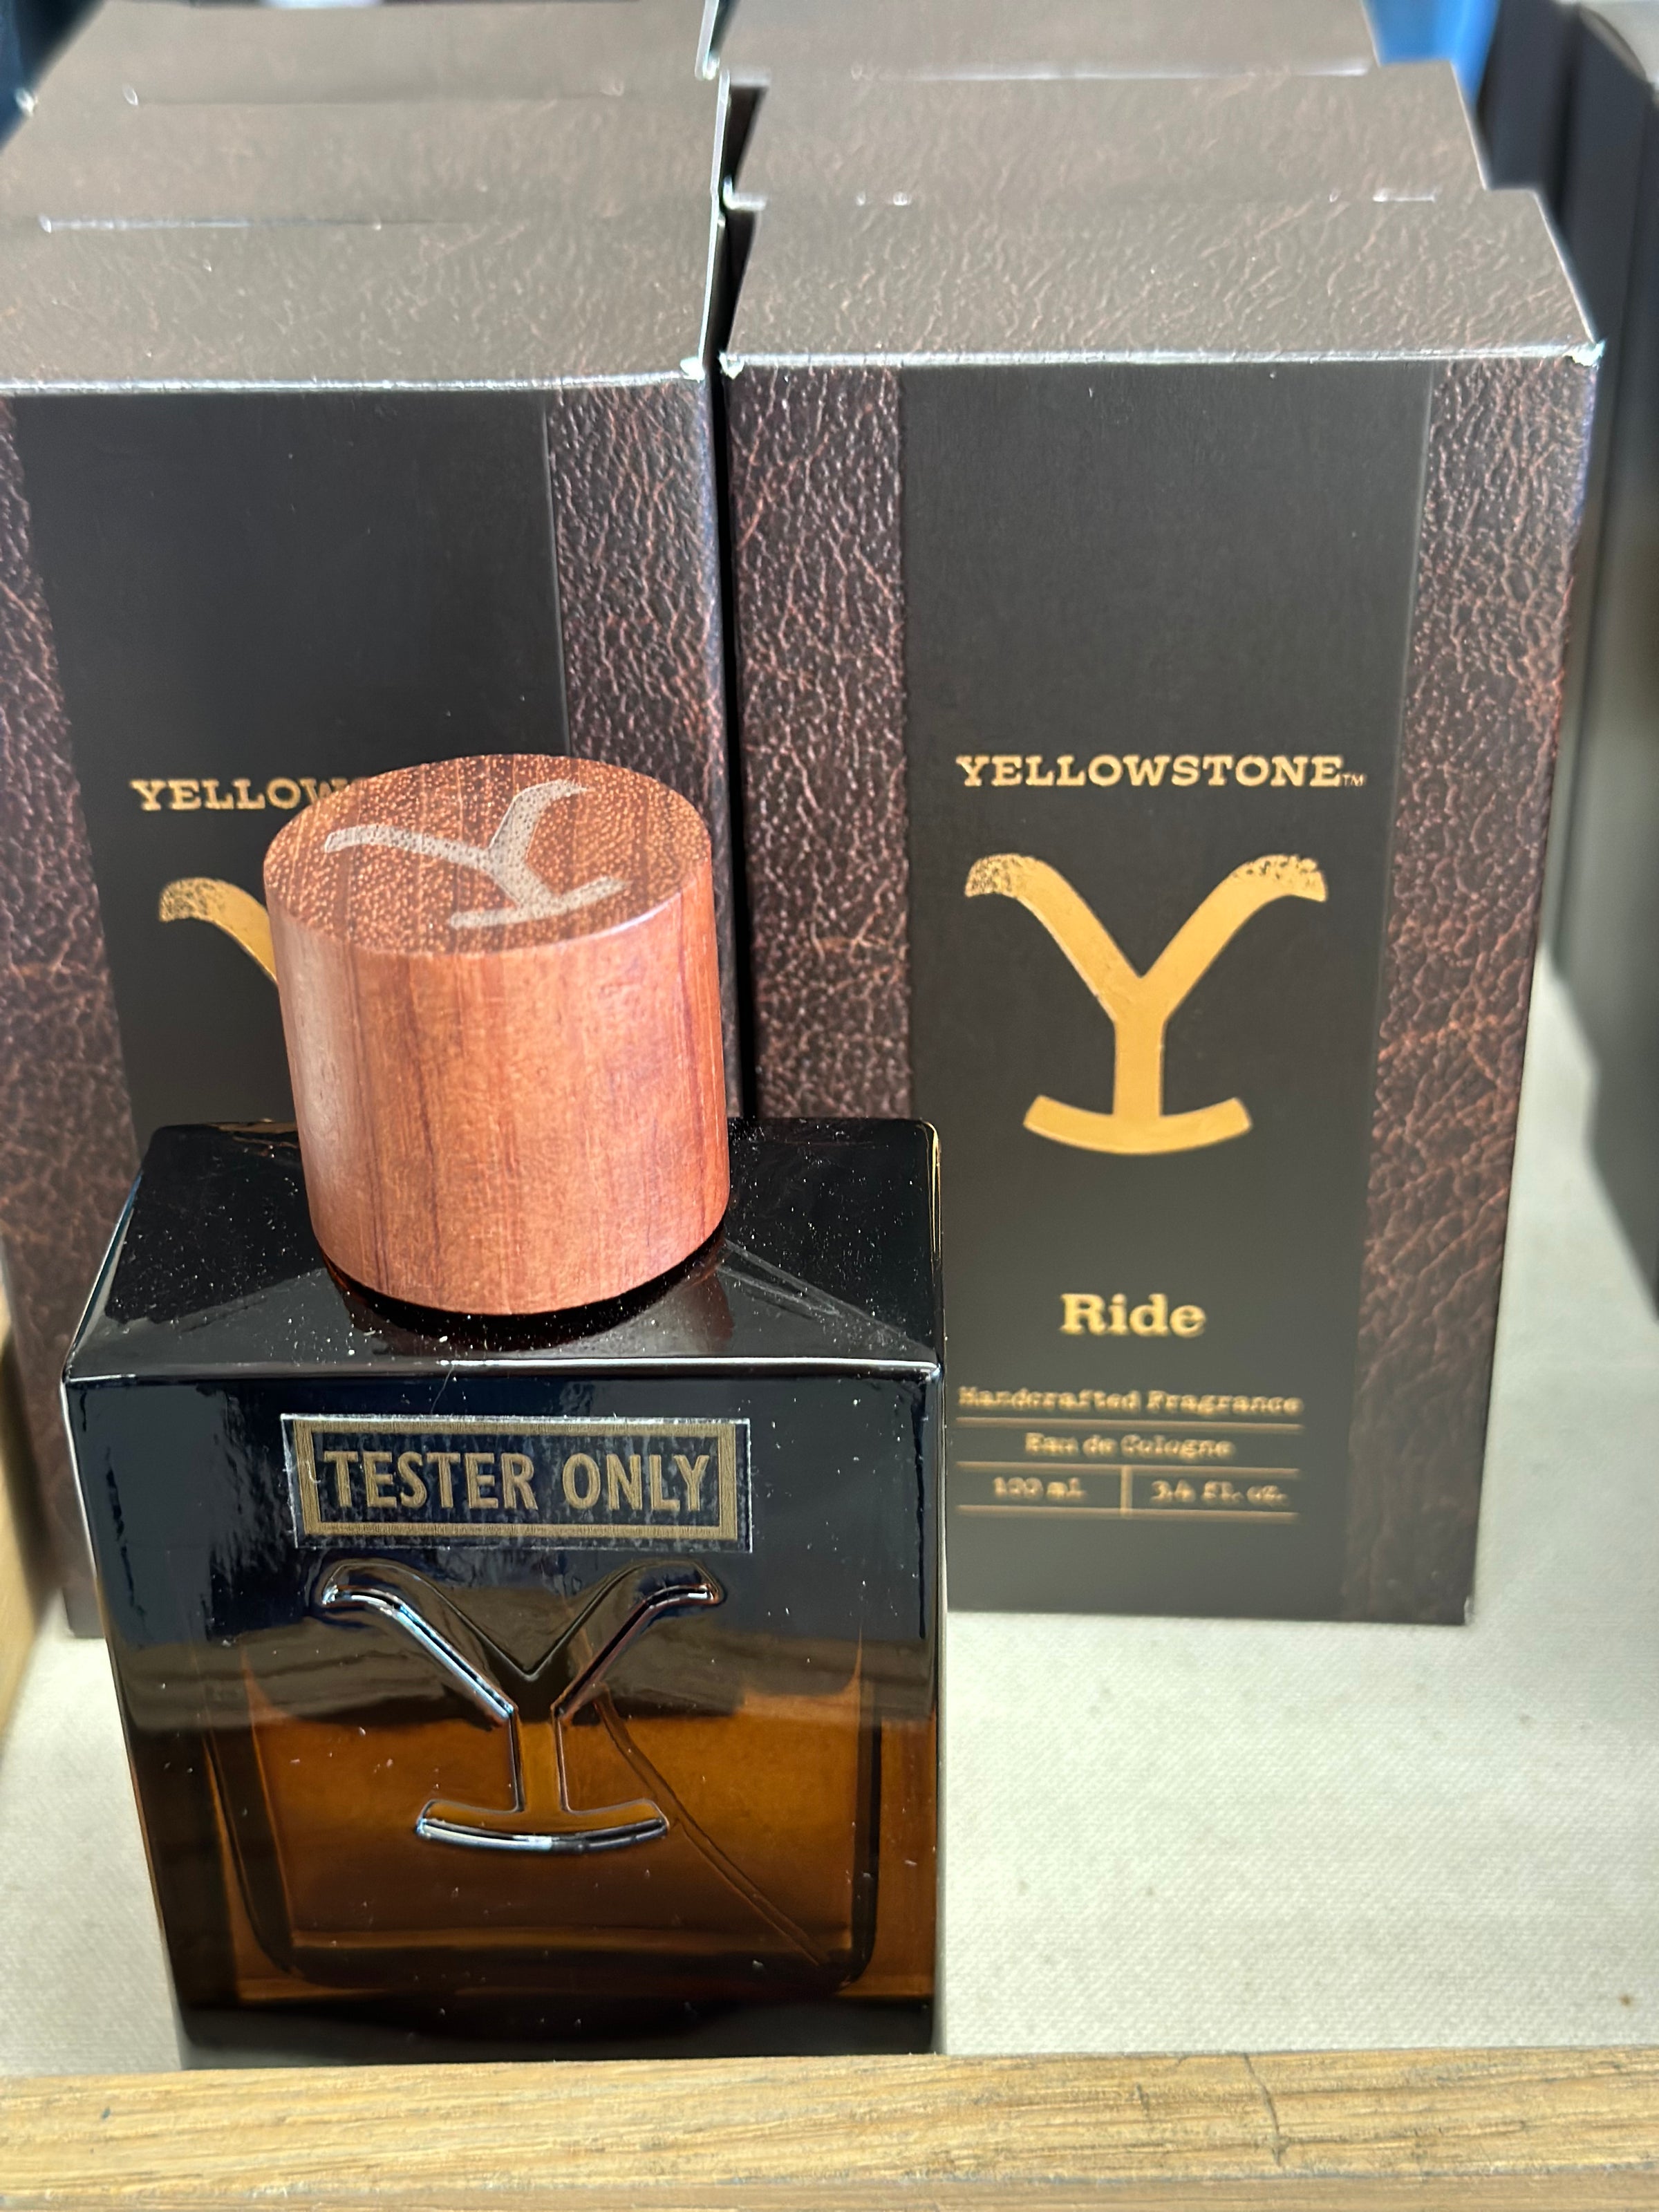 Yellowstone Men's Cologne - Ride – 56 FEED CO